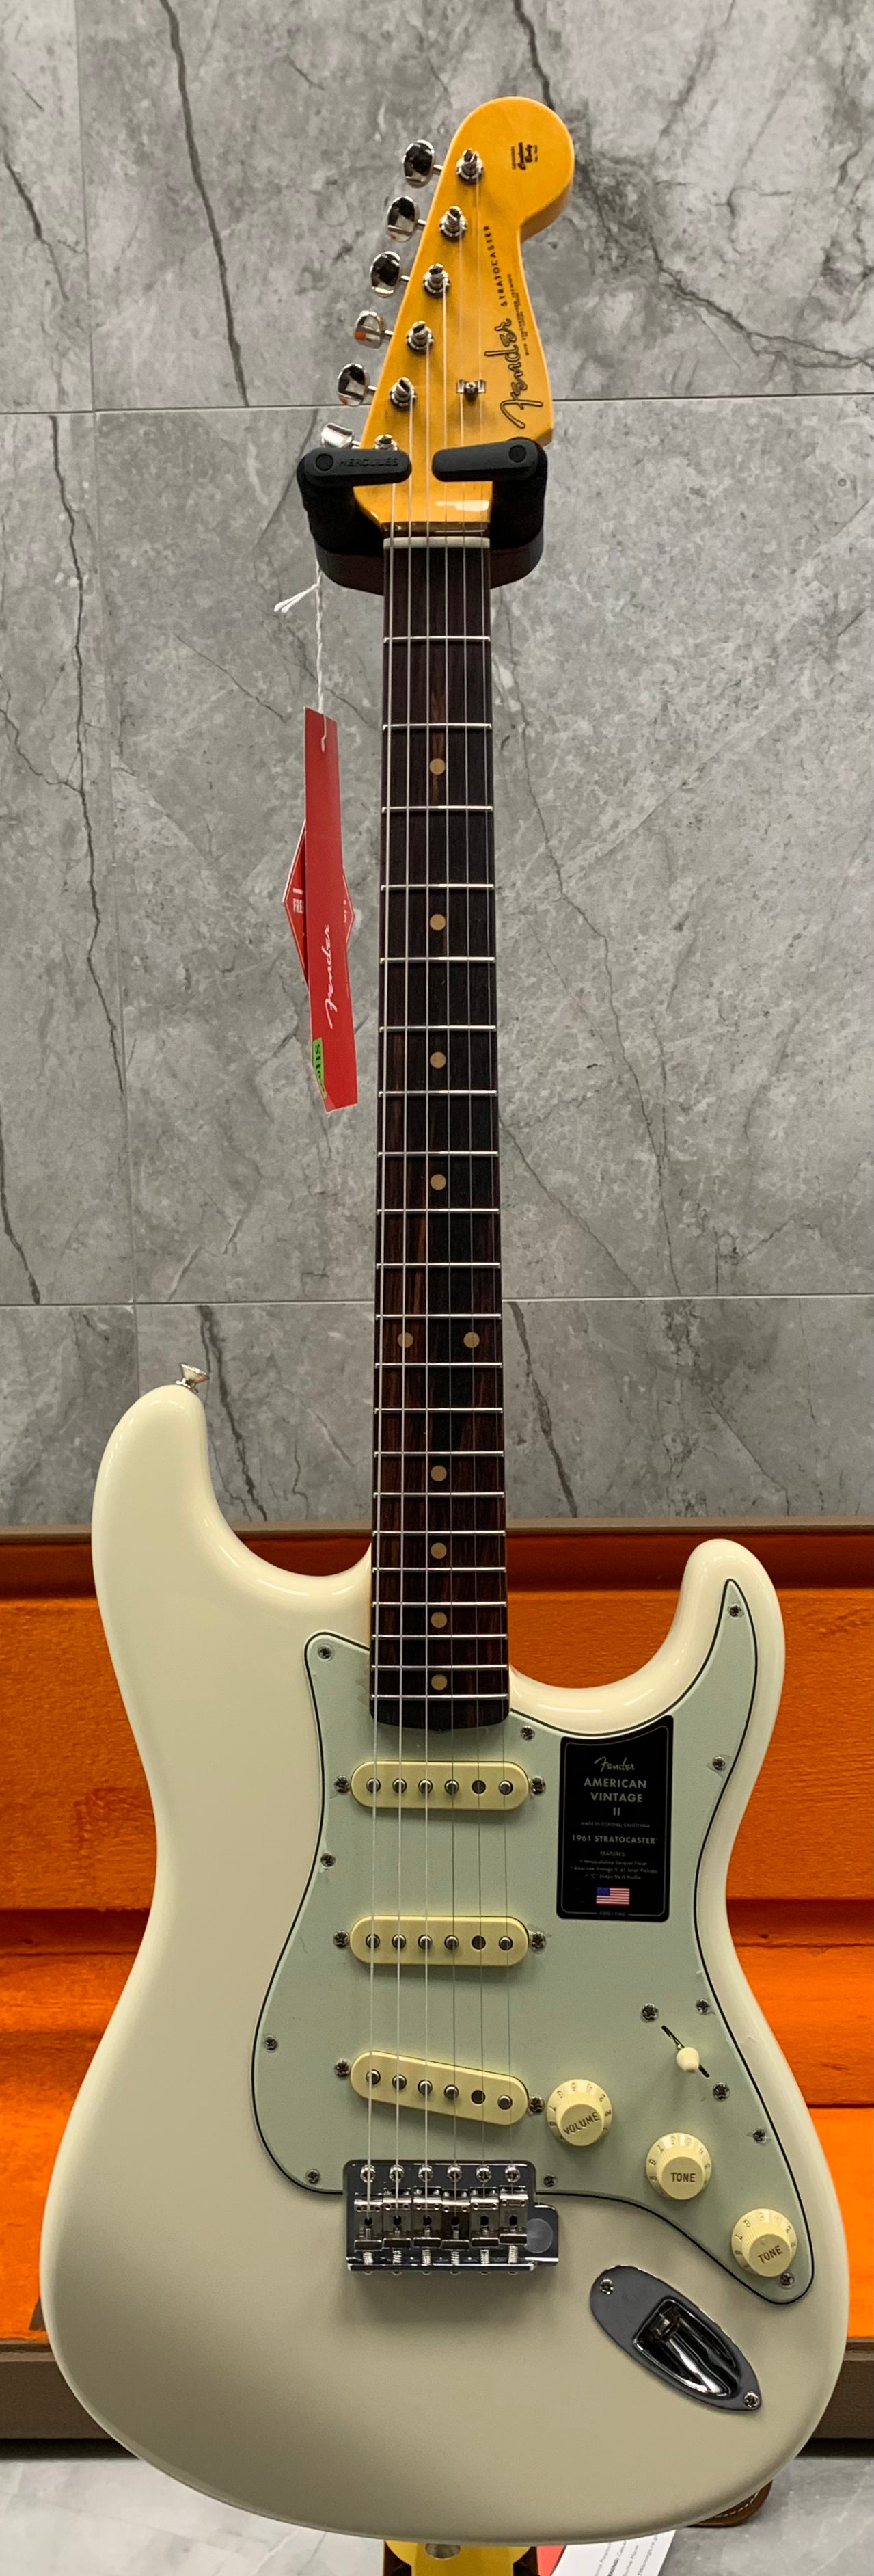 Fender American Vintage II 1961 Stratocaster Rosewood Fingerboard, Olympic White 011025080